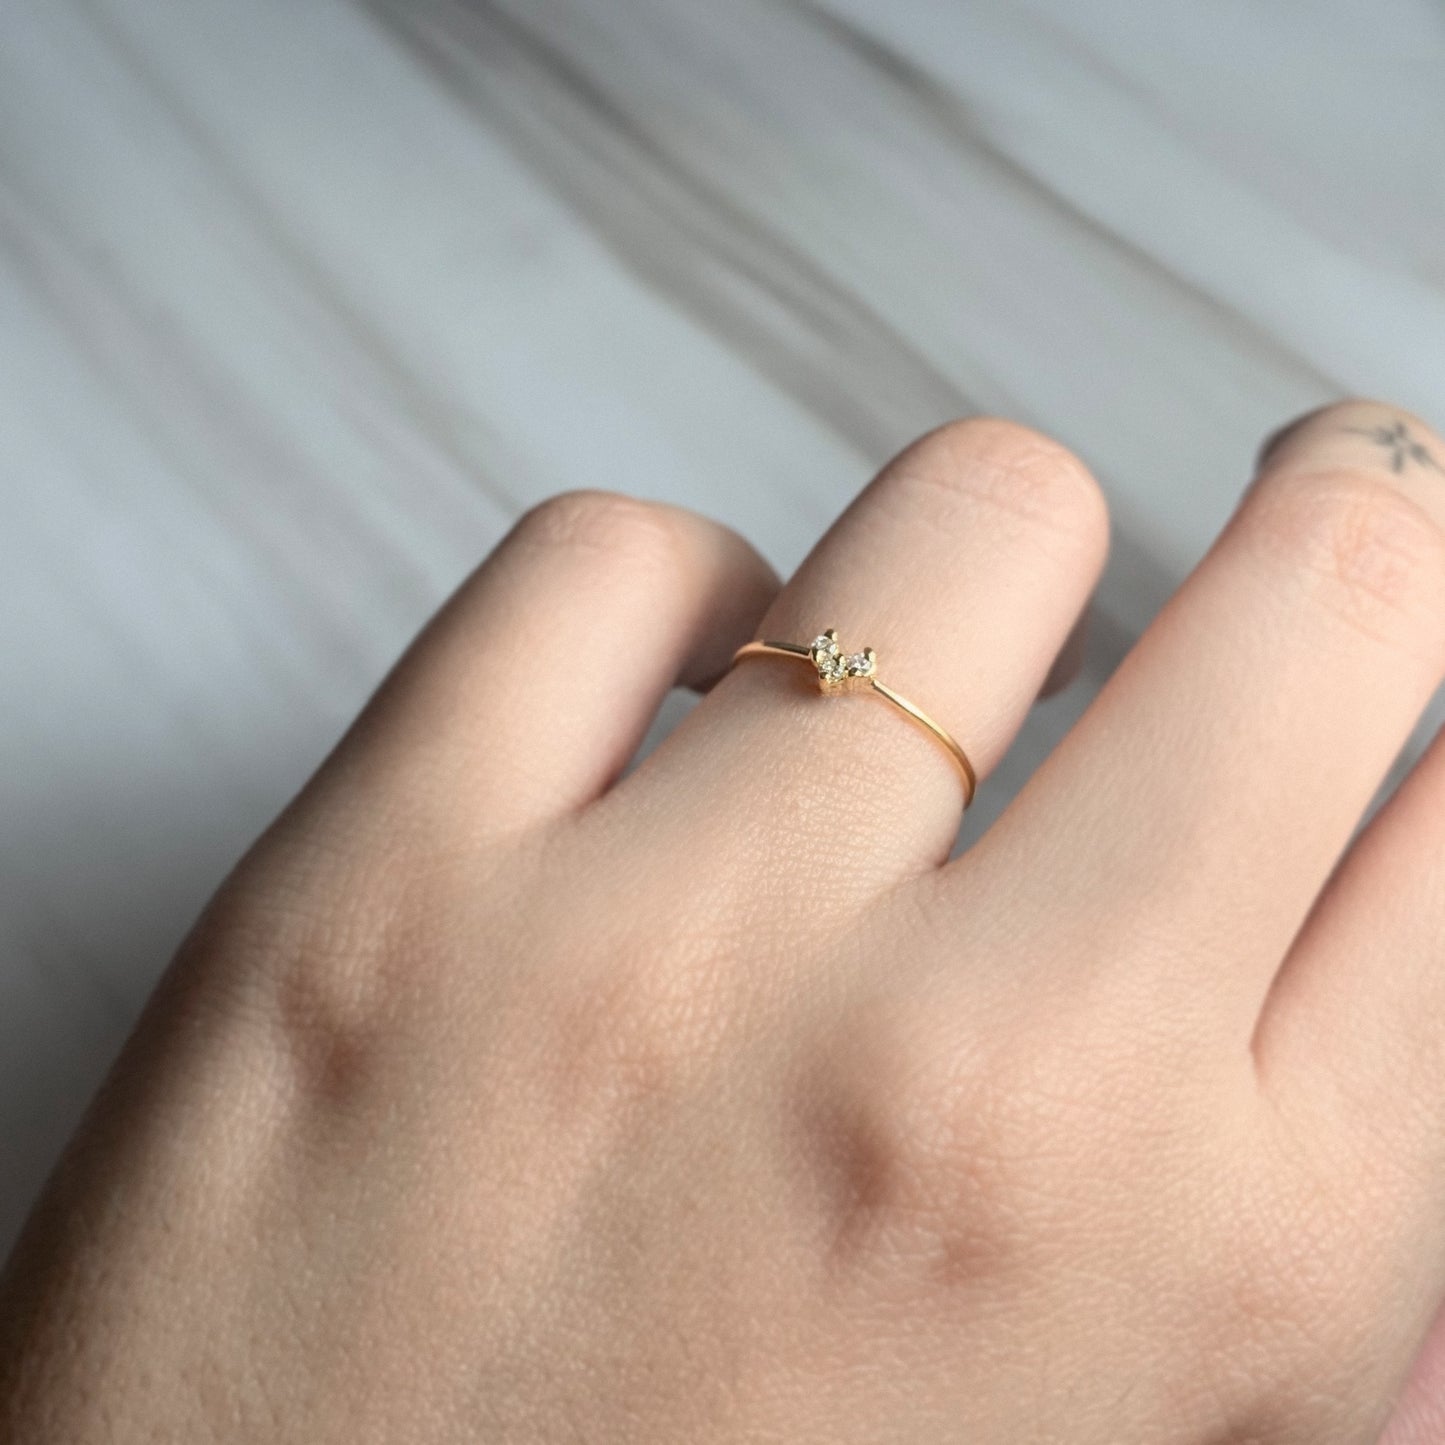 The Tiny Heart Diamond Ring in Solid Gold